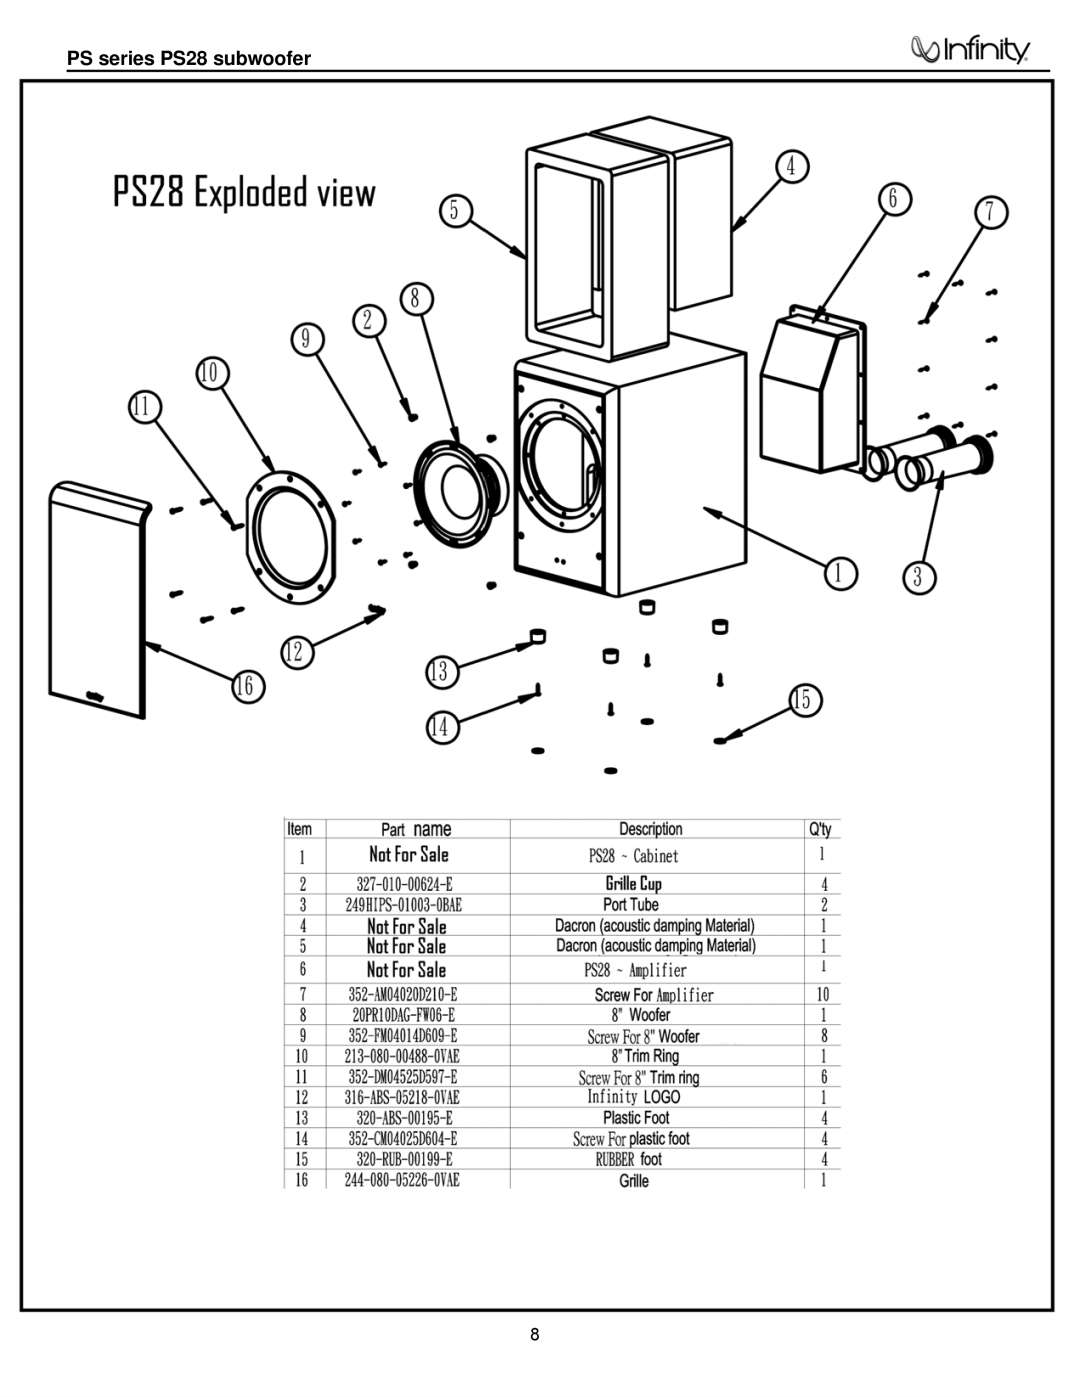 Infinity service manual PS series PS28 subwoofer 